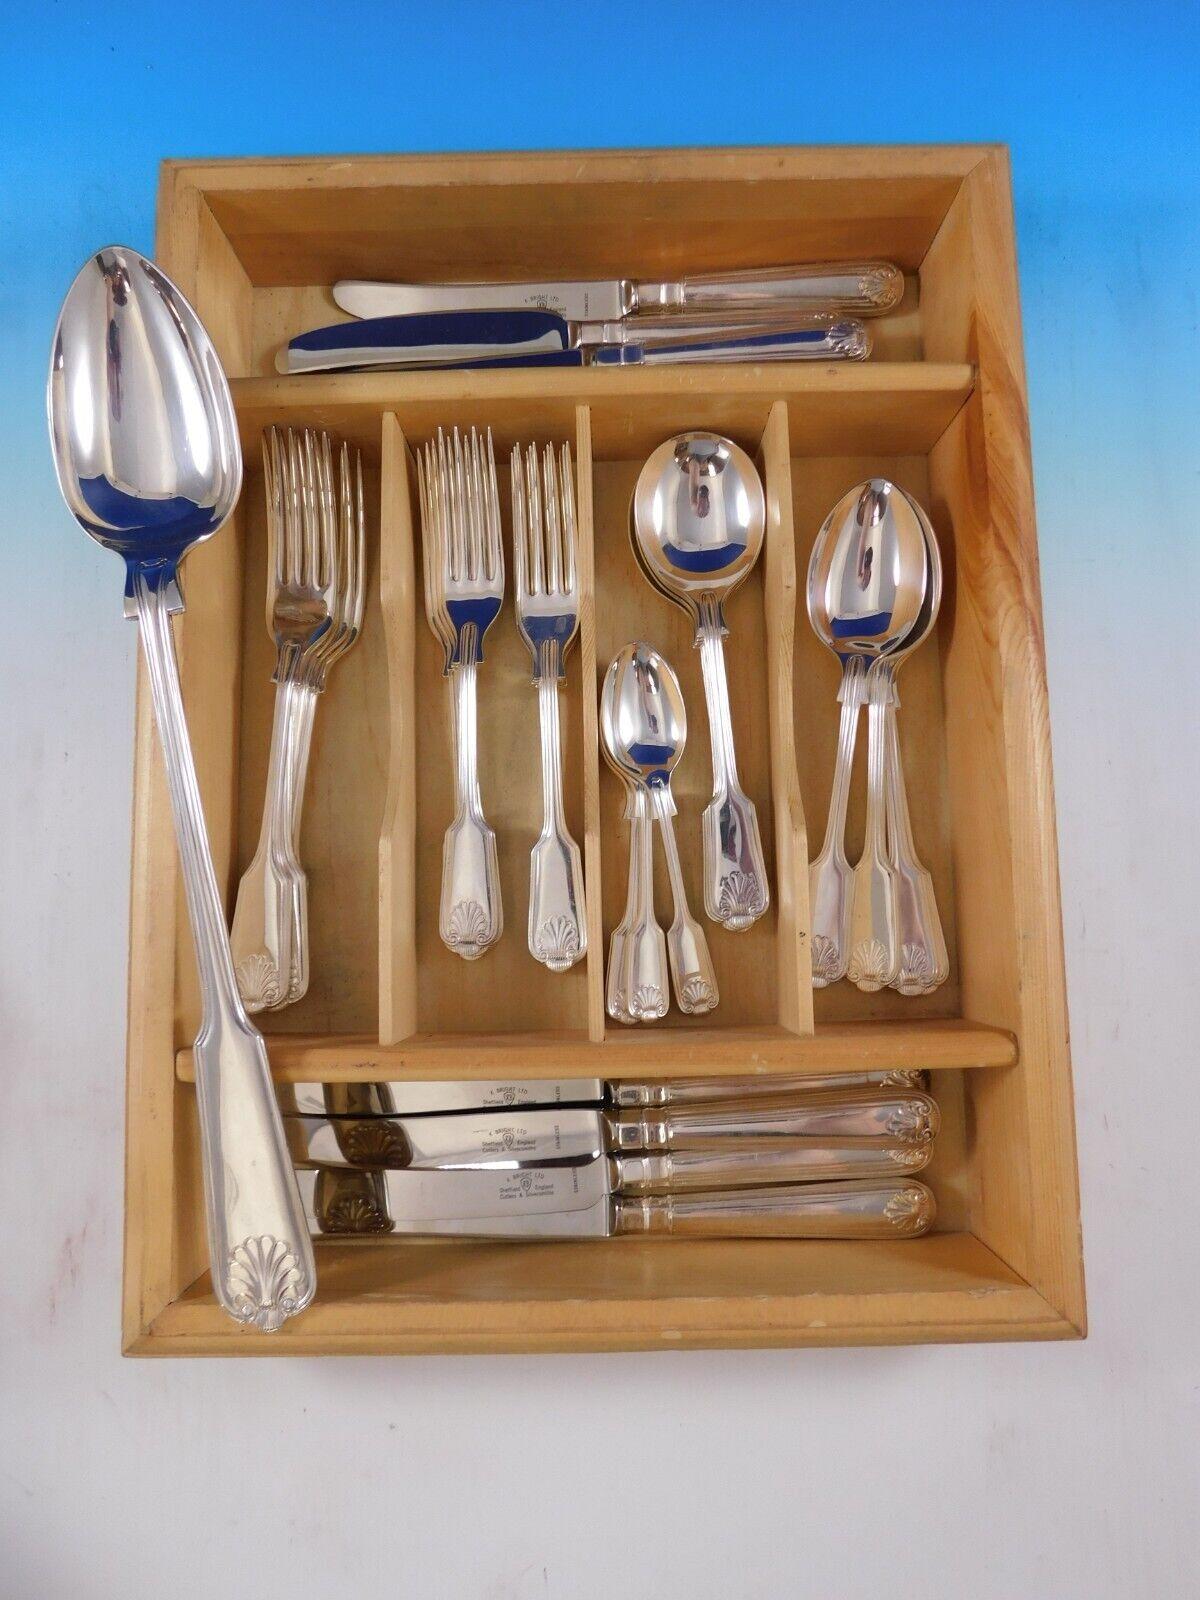 Fiddle Shell by Kenneth Bright English Silverplated Flatware set, 33 pieces. This set includes:

4 Large Dinner Size Knives, 10